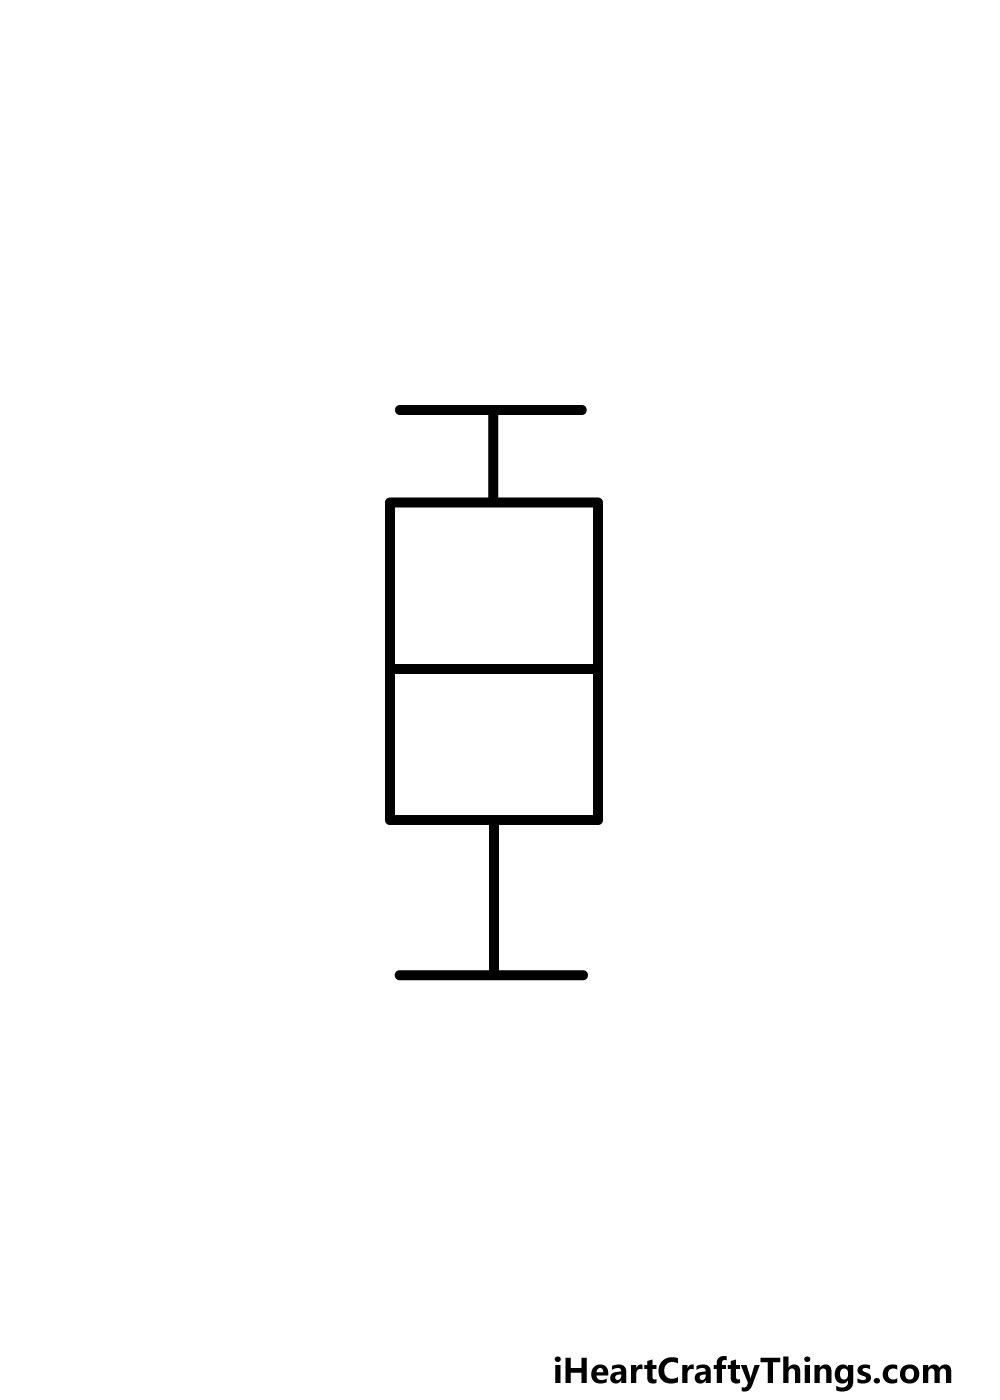 How to Draw A Box Plot step 5